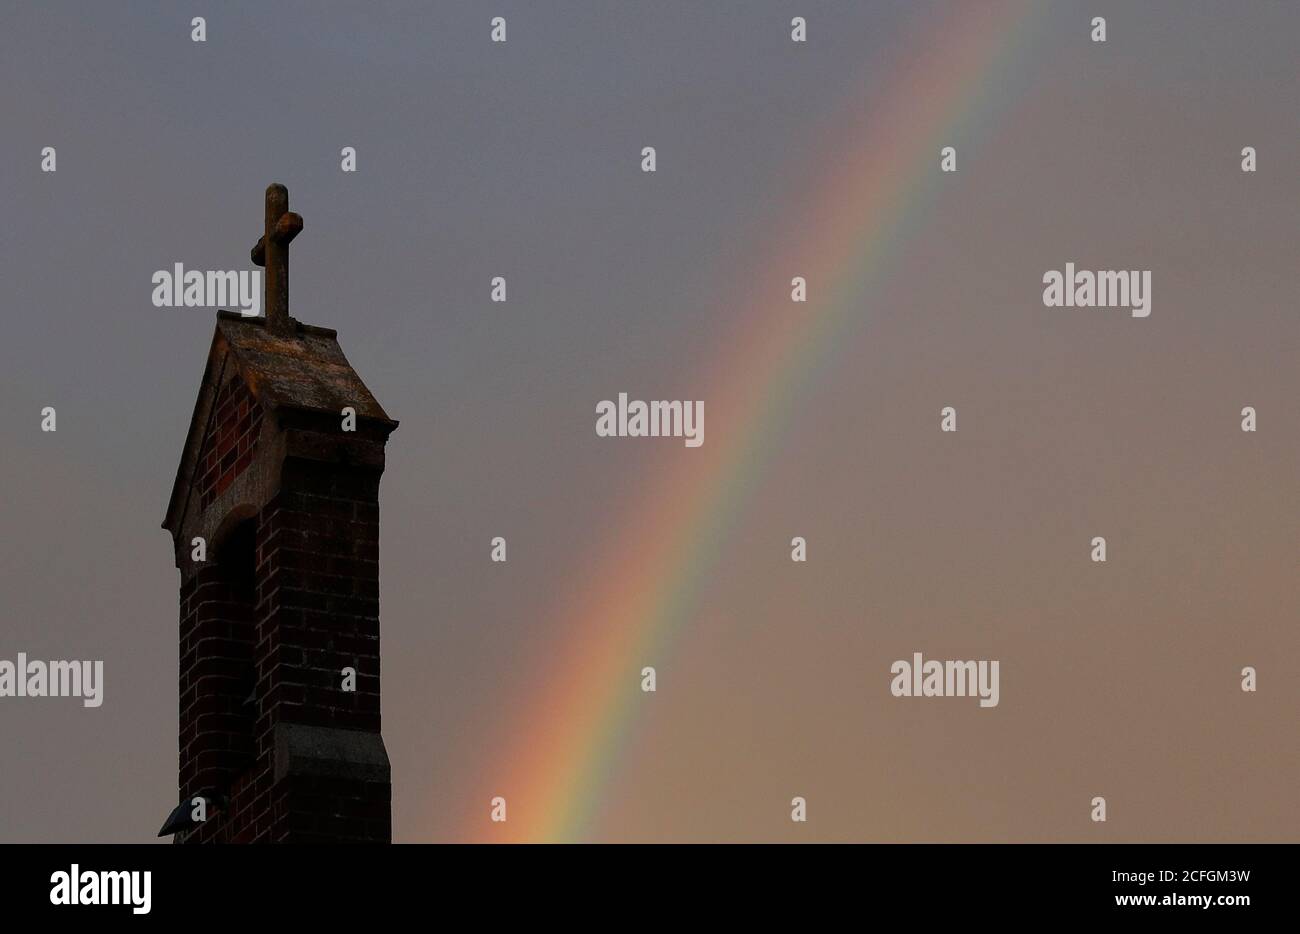 Loughborough, Leicestershire, UK. 5th September 2020. UK weather. A rainbow forms behind the Good Shepherd Church after rainfall at dusk. Credit Darren Staples/Alamy Live News. Stock Photo